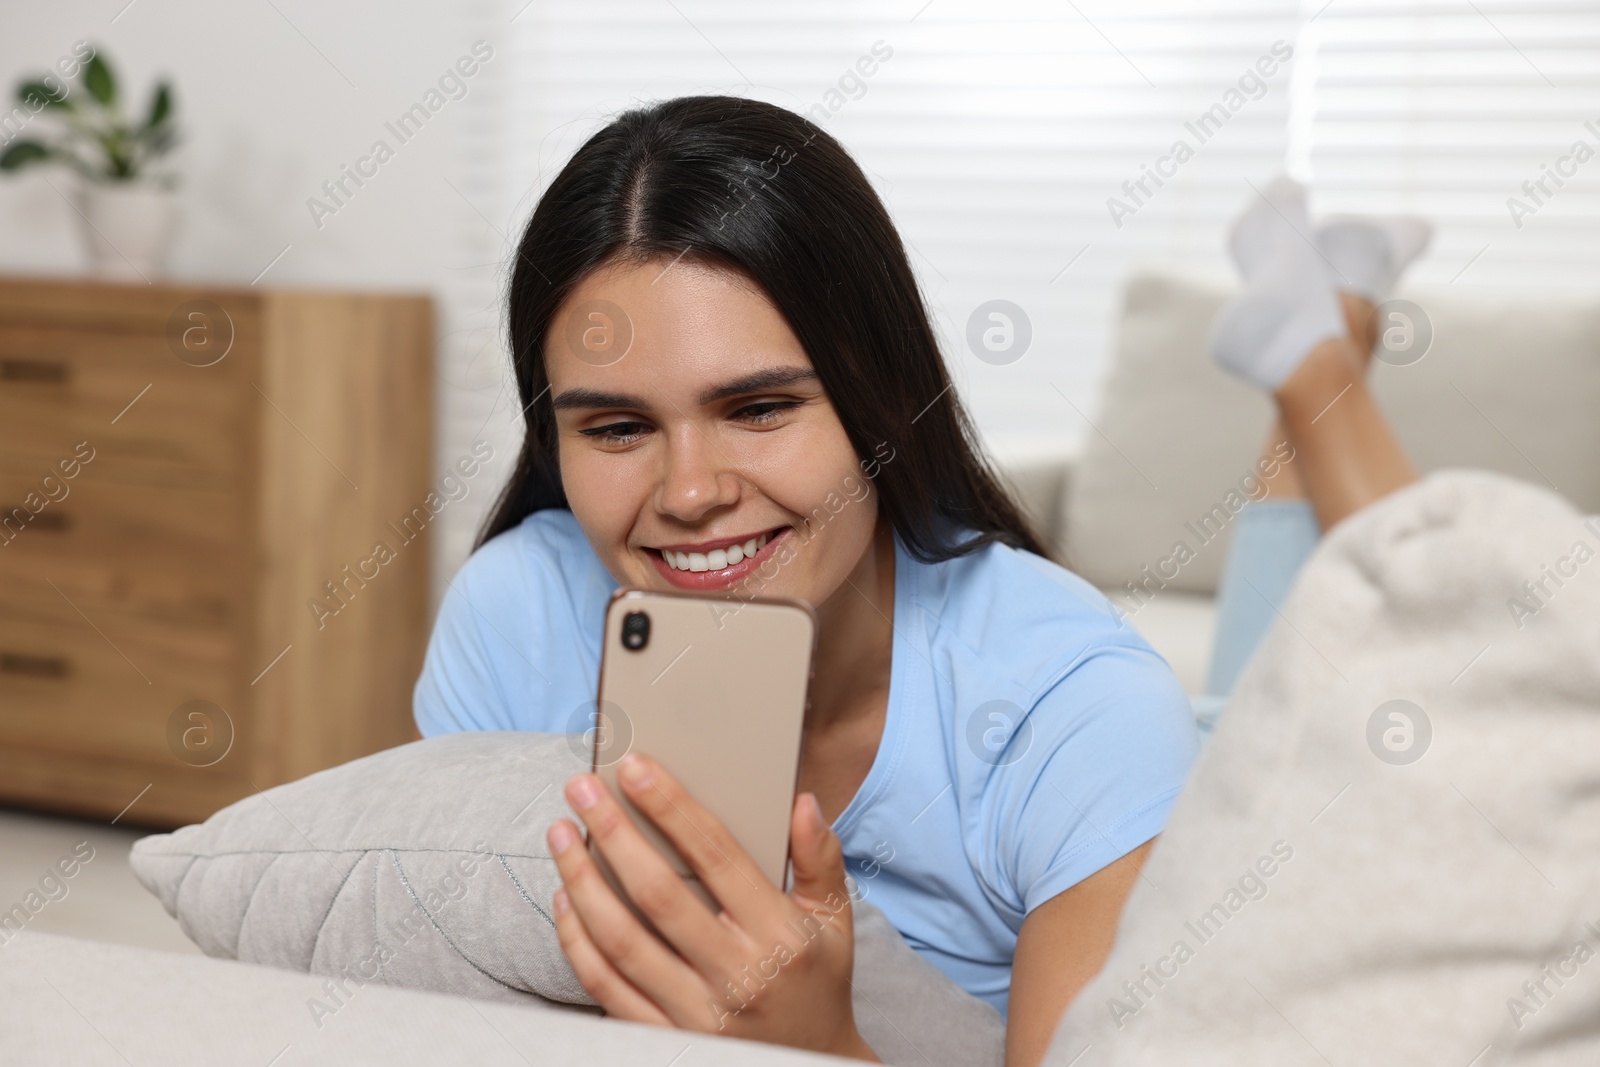 Photo of Happy young woman having video chat via smartphone on sofa in living room